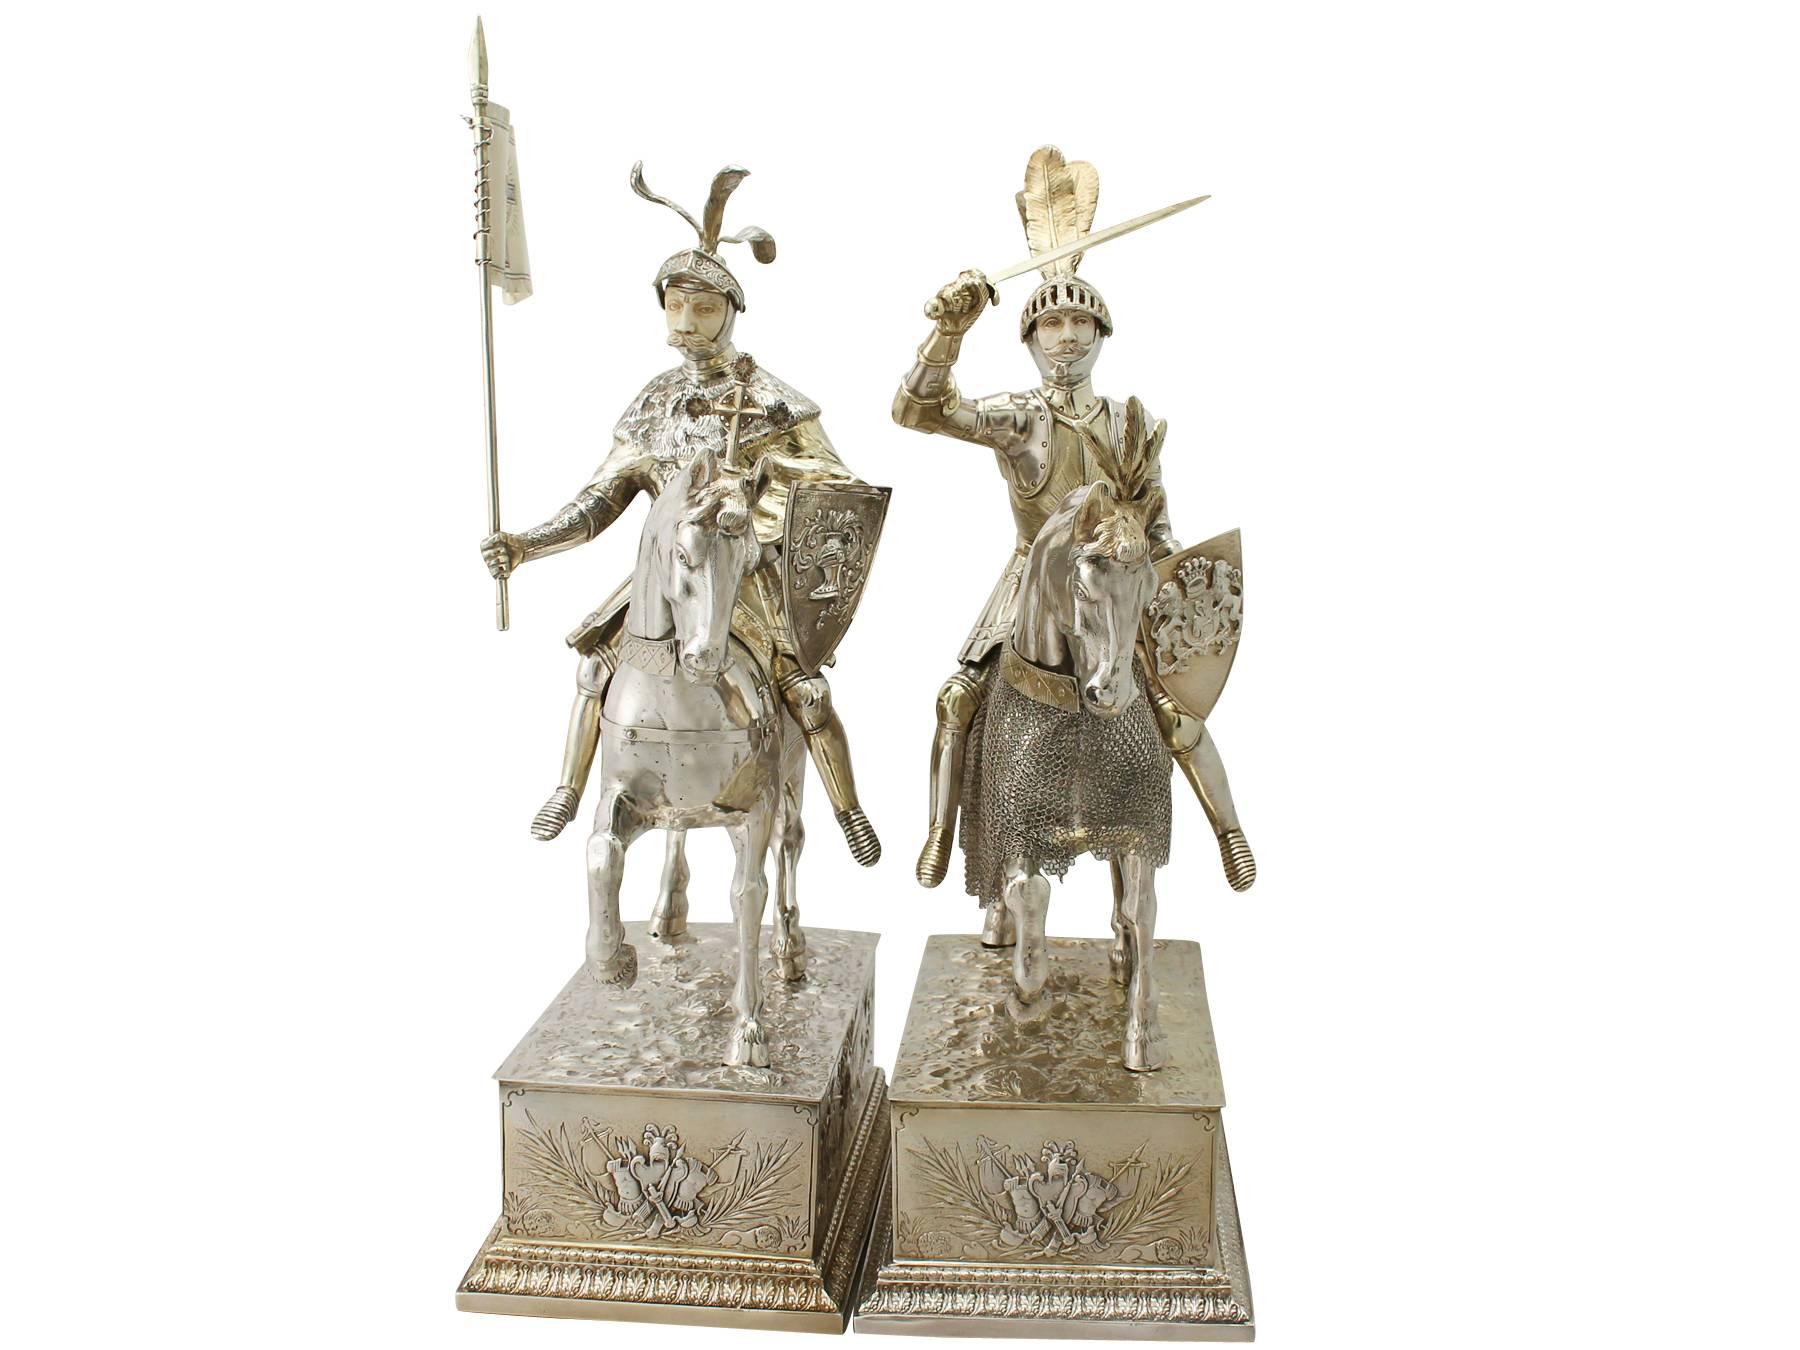 A magnificent, fine and impressive pair of large antique German 800 standard silver table ornaments modelled in the form of knights on horseback; an addition to our diverse ornamental silverware collection

This magnificent pair of antique German